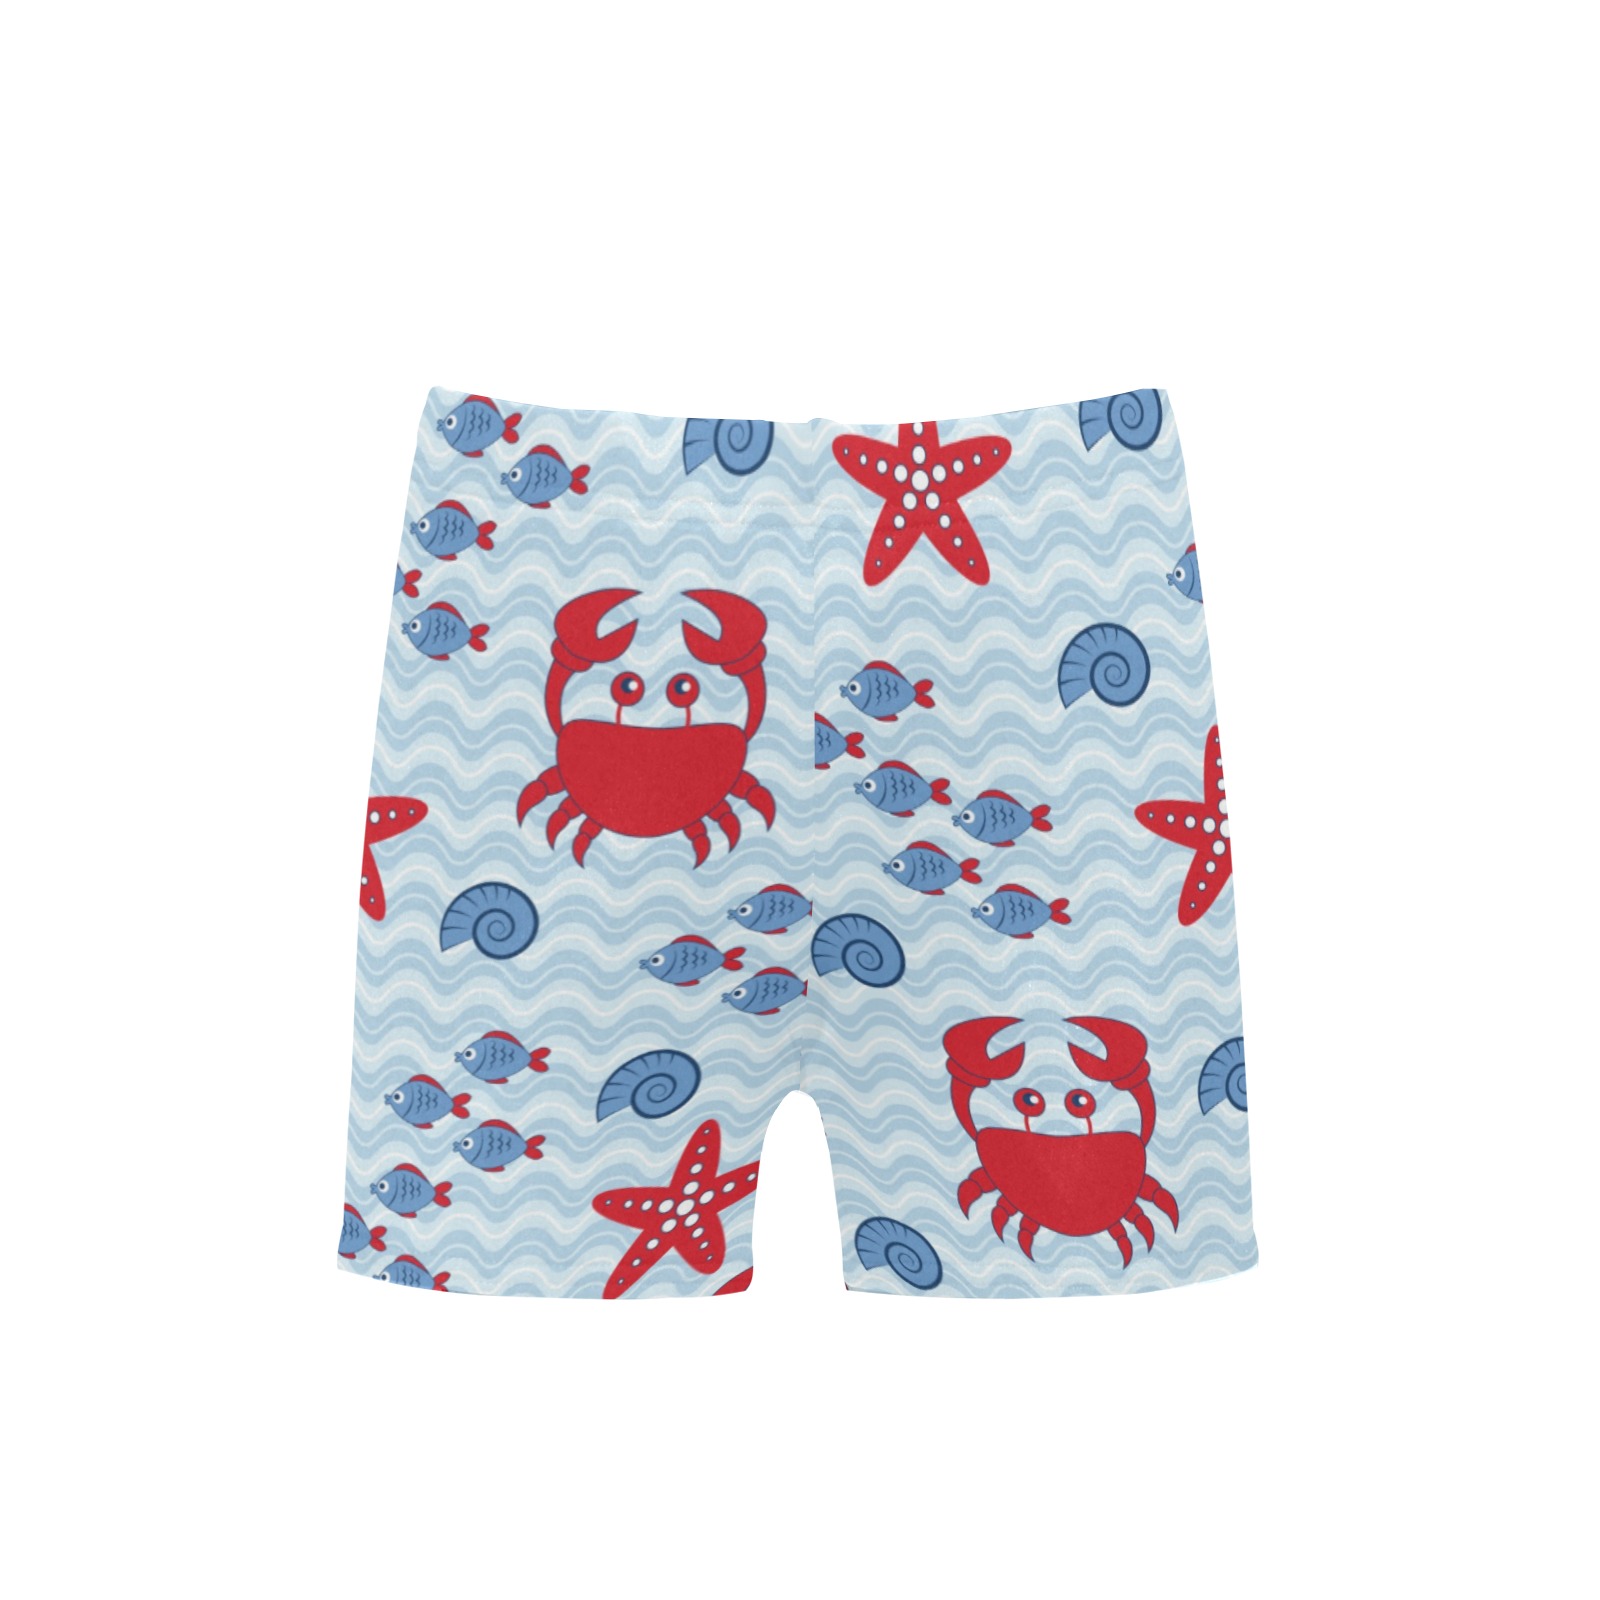 Crab, starfish, shell and fish. Little Boys' Swimming Trunks (Model L57)